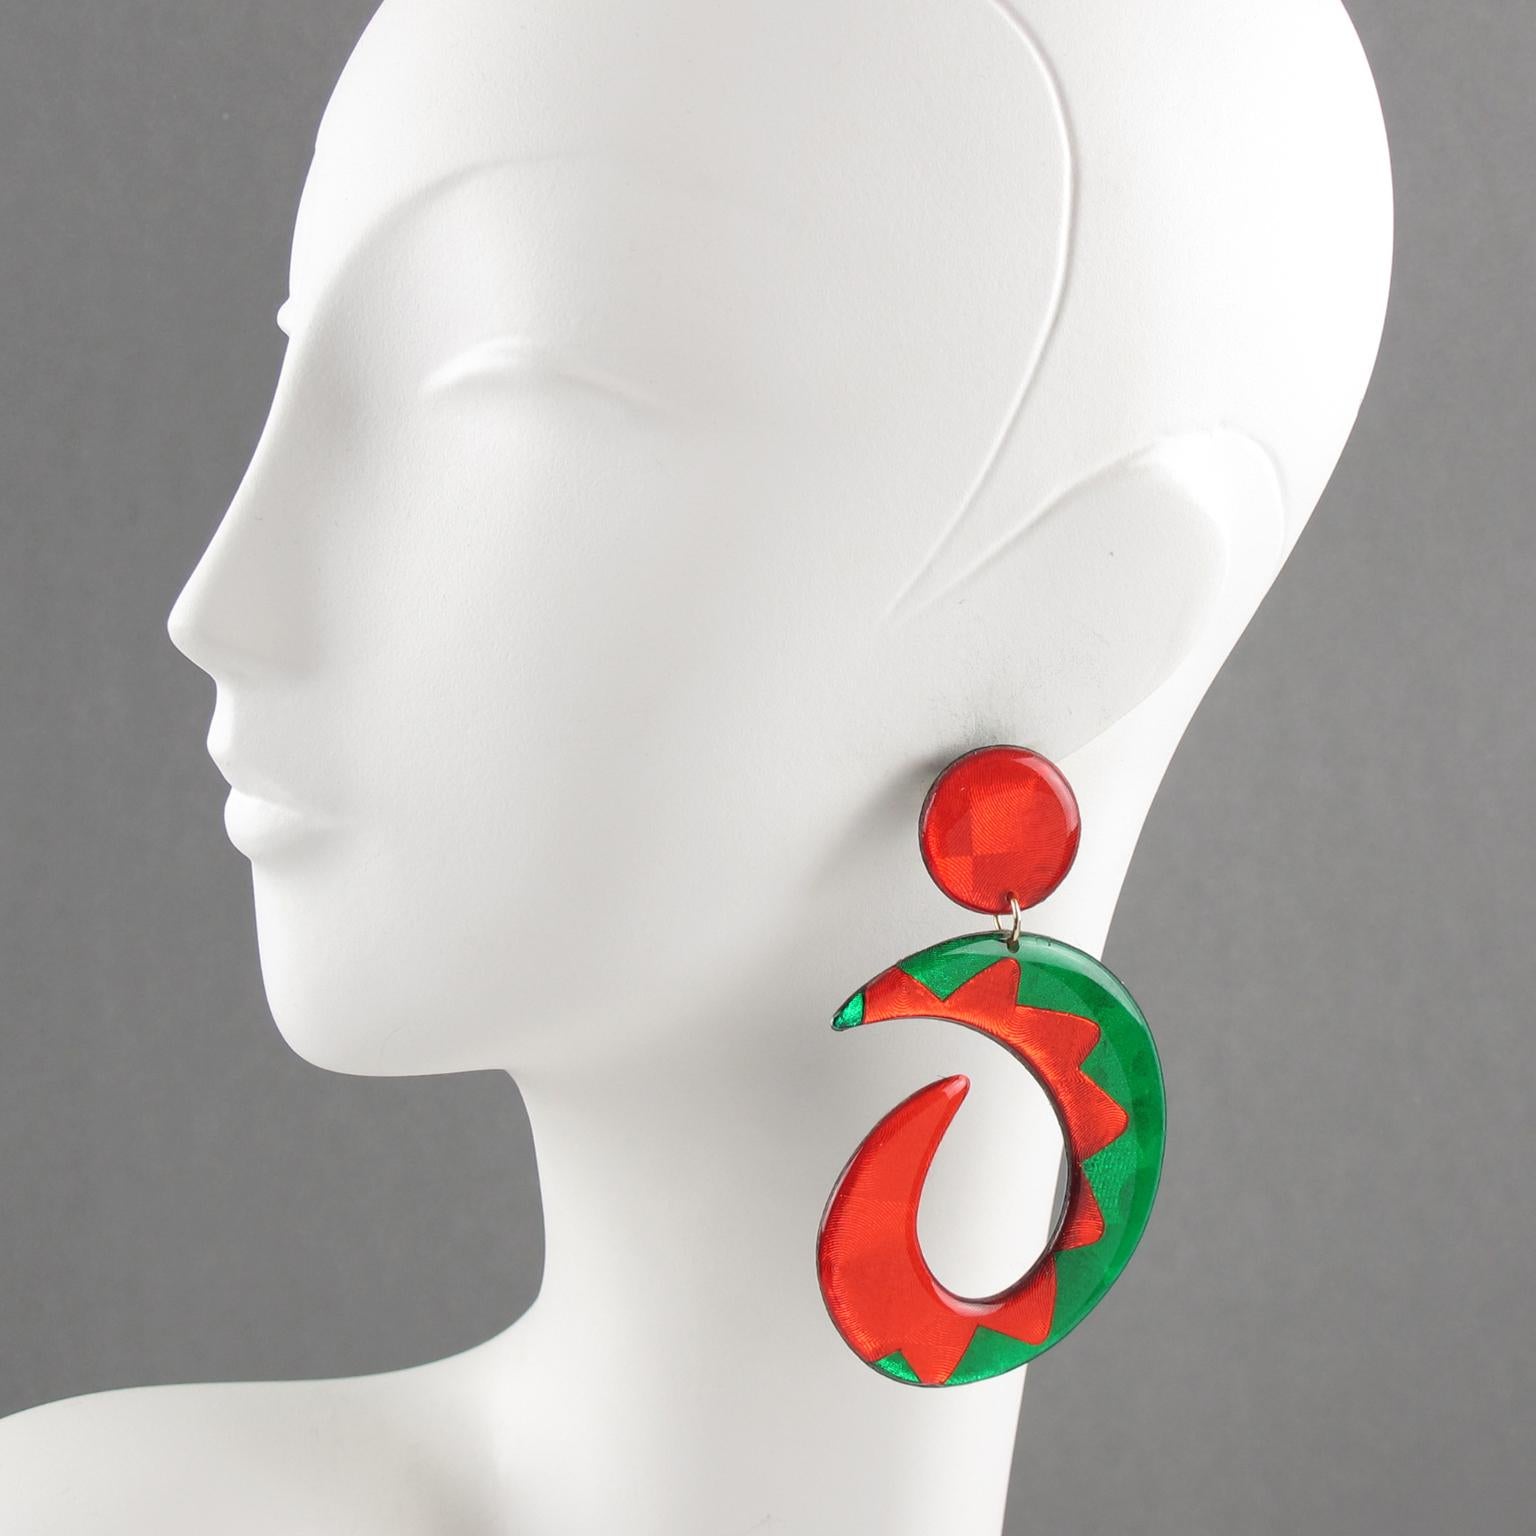 These impressive Lucite dangling pierced earrings boast an oversized chandelier shape with a free-form open hoop design in bright green and neon red colors with a glittering textured pattern and black background. These pieces are for pierced ears.